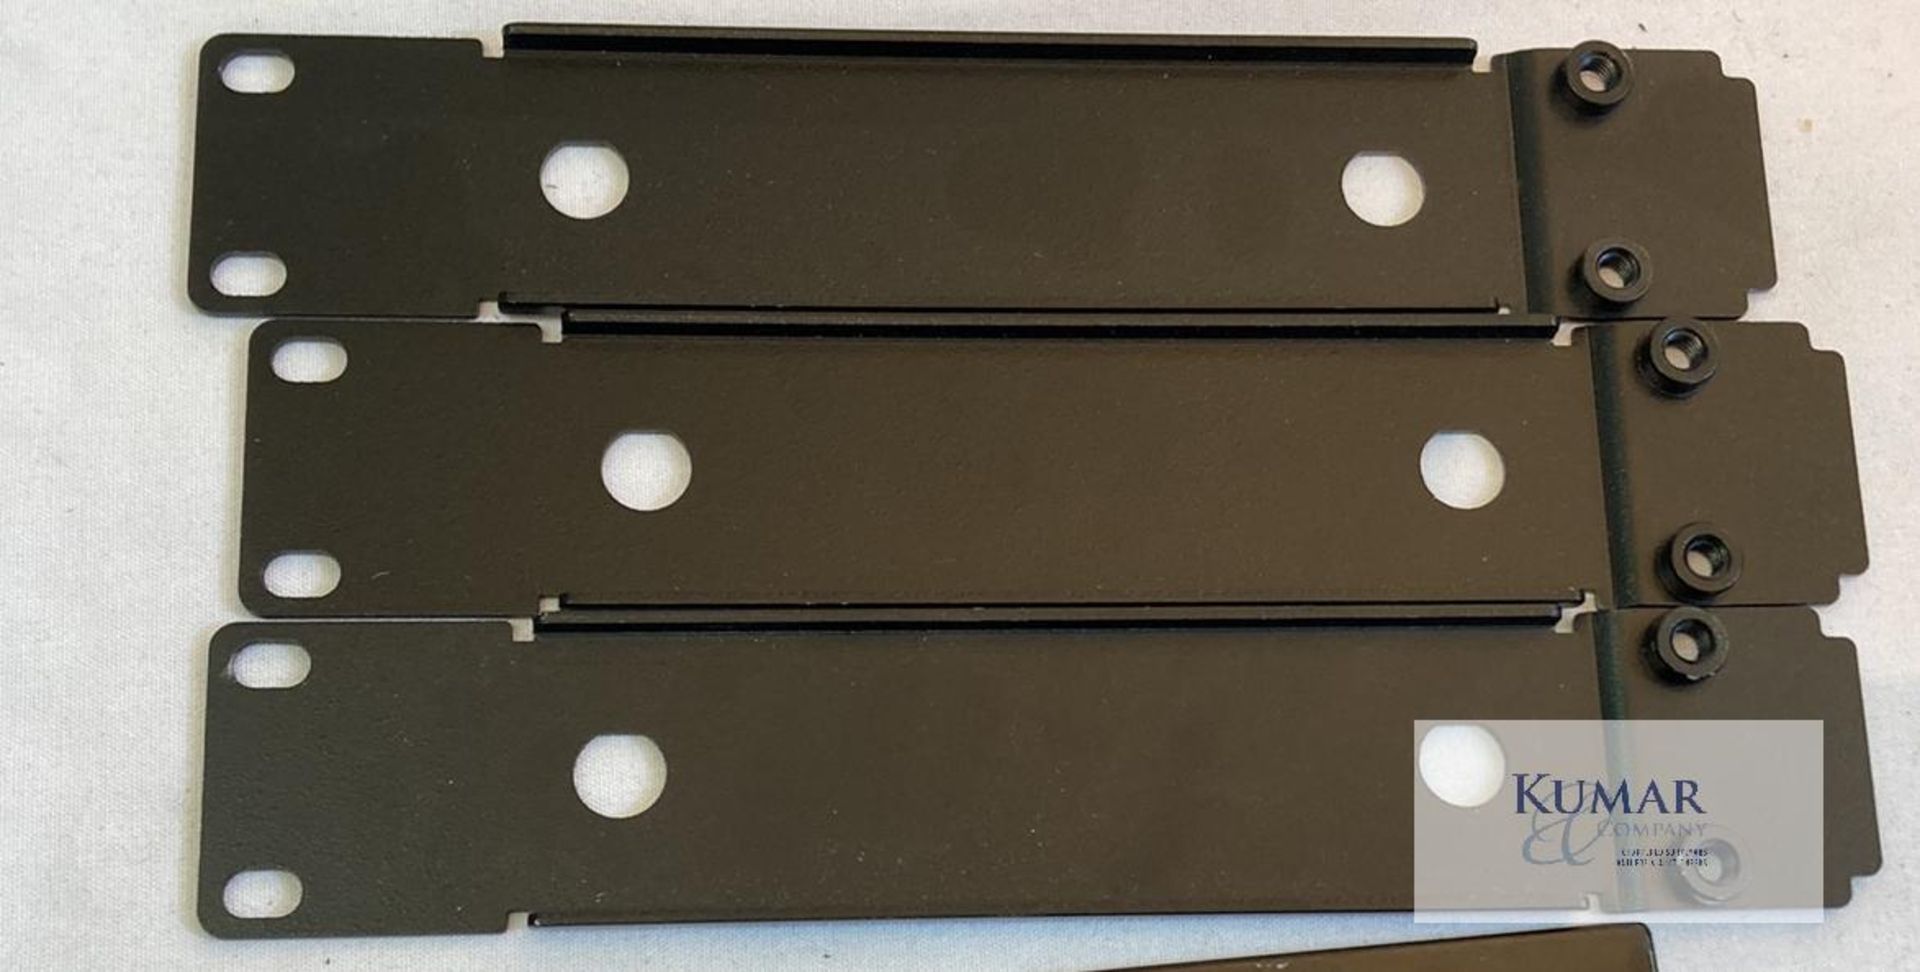 19" rack blanking plate and mounting assortment Description: Assortment of 19" blanking plates - Image 10 of 15